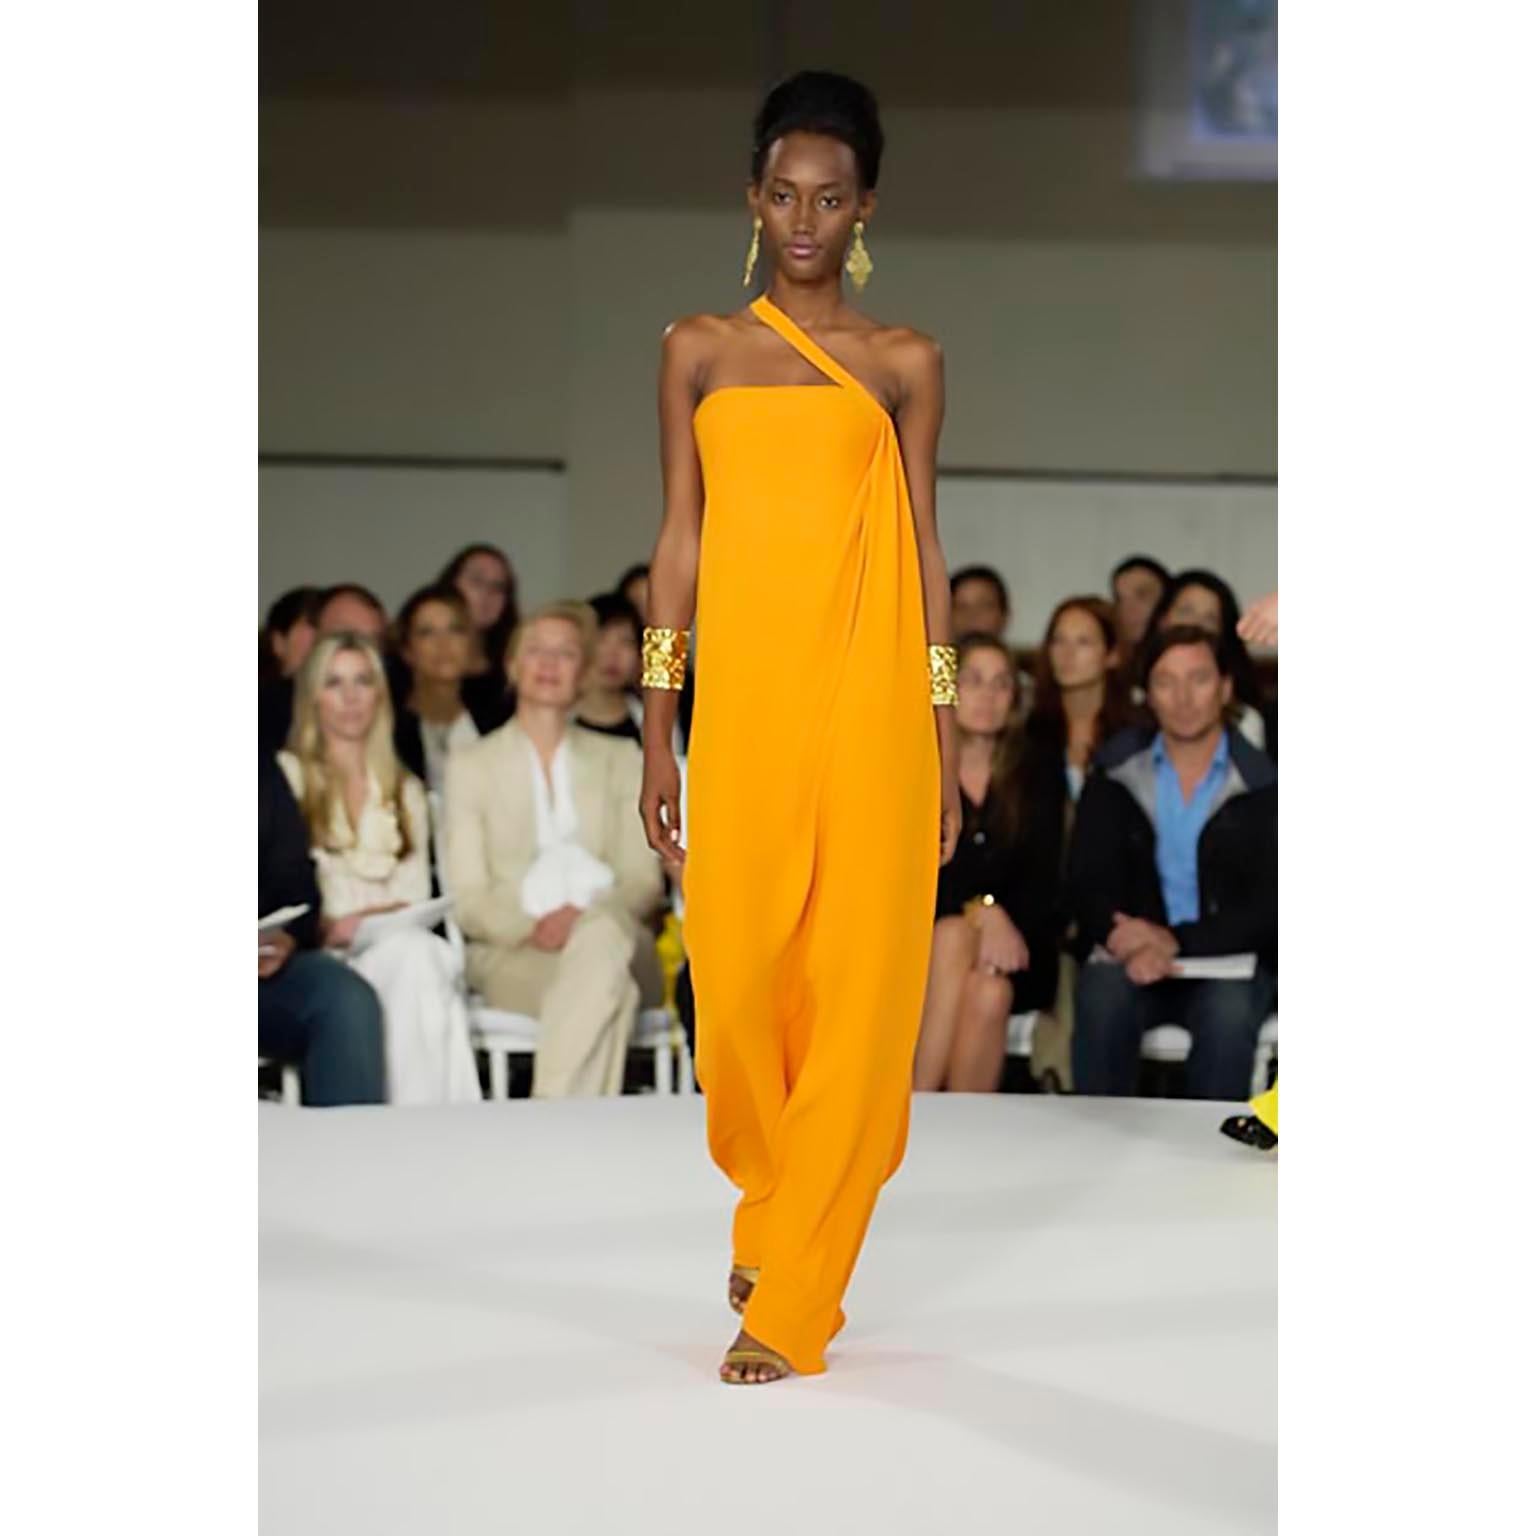 Stunning tangerine orange evening gown by Oscar de la Renta from his 2008 Cruise line. This dress has a fitted 